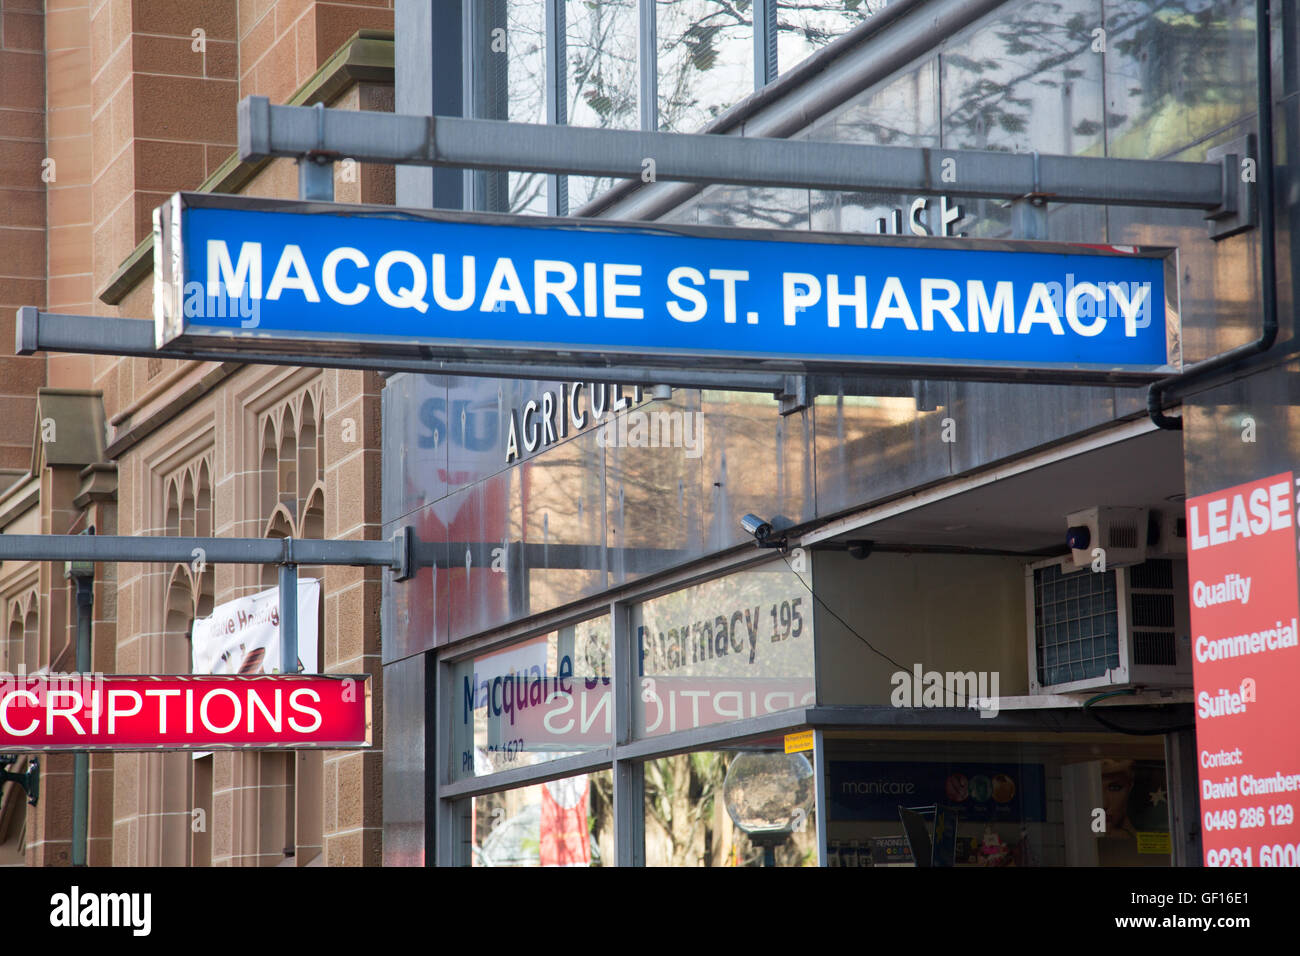 Pharmacy in Sydney's macquarie street, known for its medical facilities,new south wales,australia Stock Photo